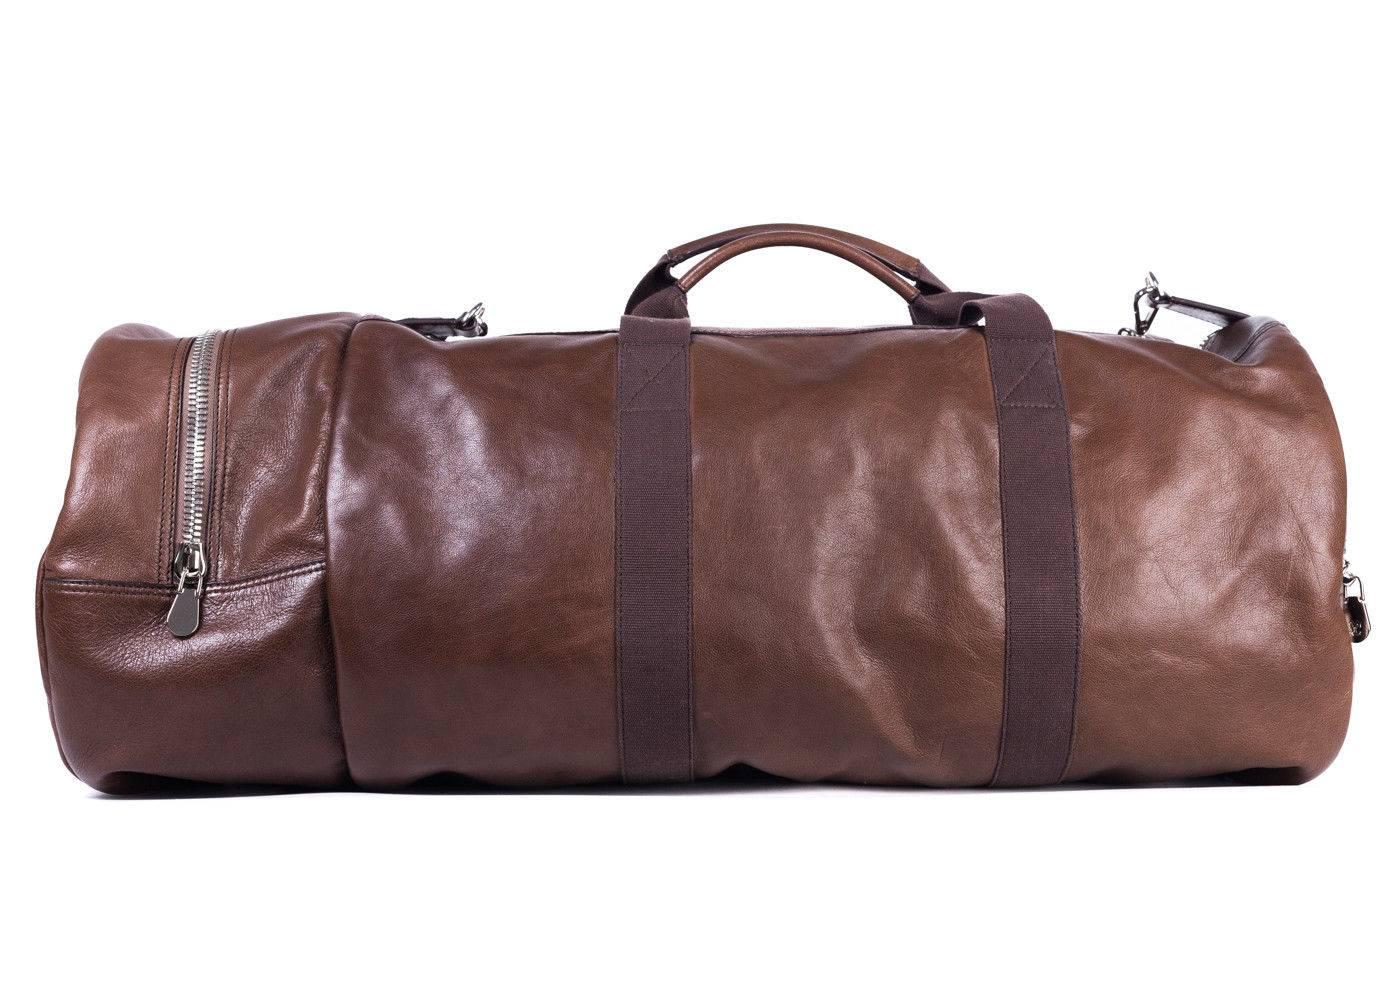 Brand New Brunello Cucinelli Duffel Bag
Dust Bag Included
Retails in Stores & Online for $2935
Dimensions: 28